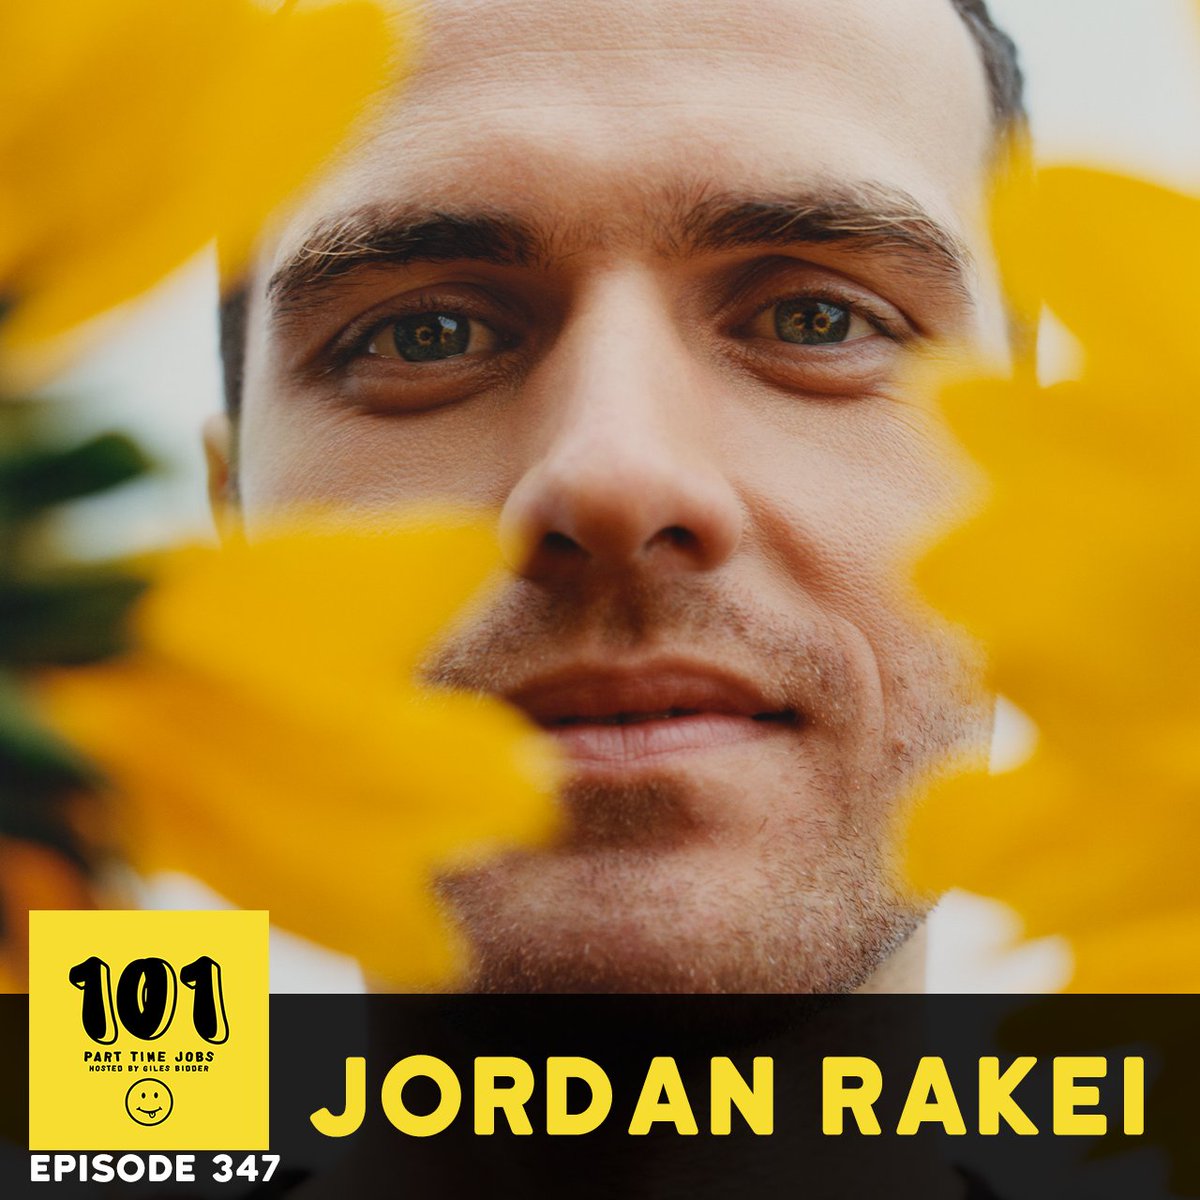 The excellent @jordanrakei knew nobody in London when he moved from Australia. Hear this episode about how Jordan saved money from stacking shelves to build a career in music, and how he finds stability in a chaotic world Hear the full episode at 101parttimejobs.com 👌